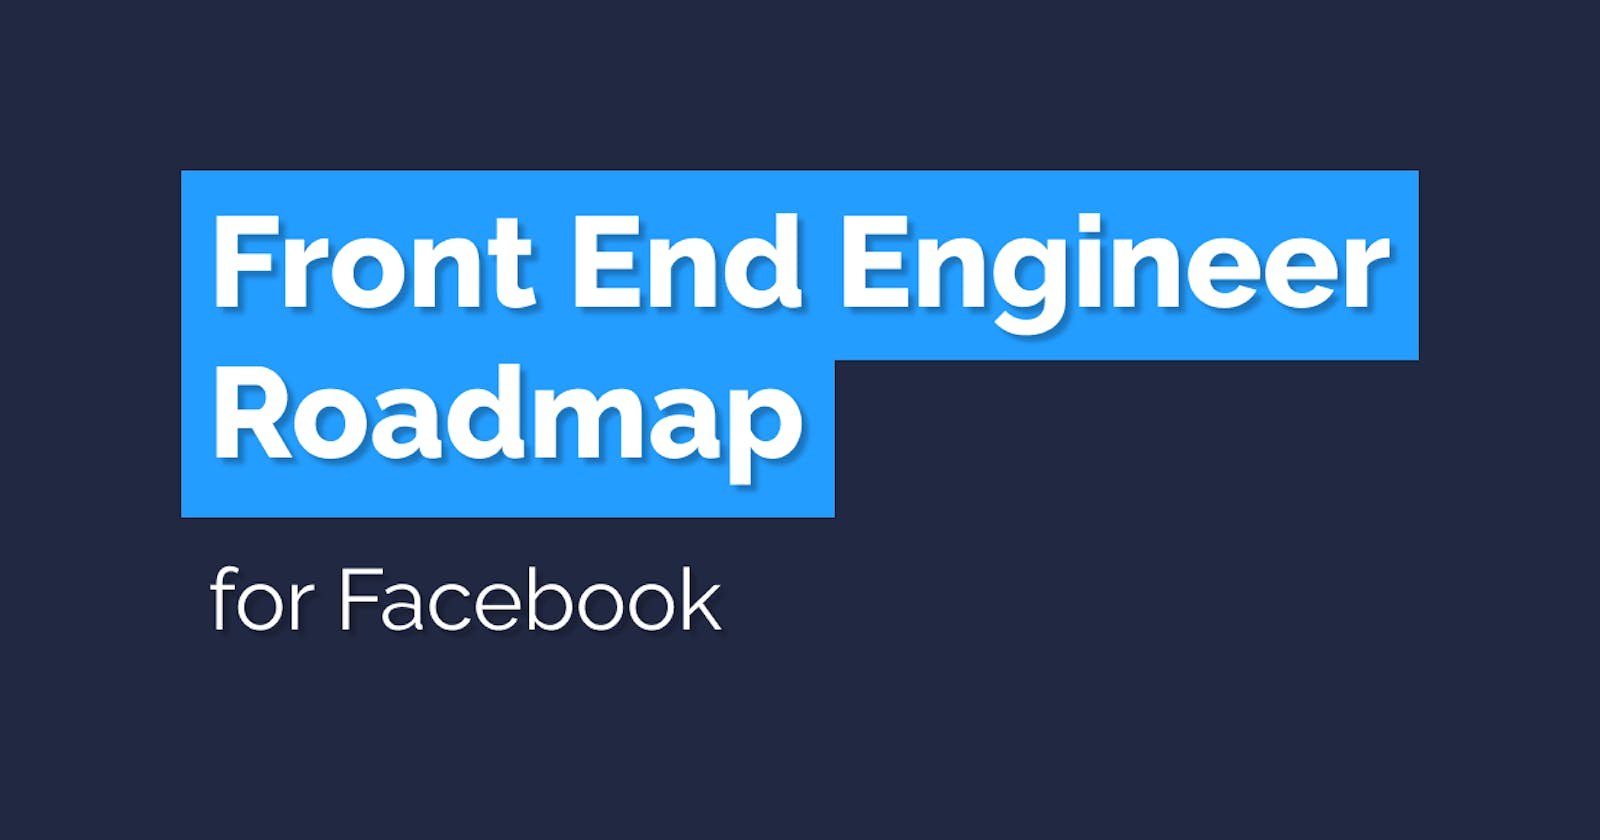 A Simplified Front End Engineer Roadmap for Facebook